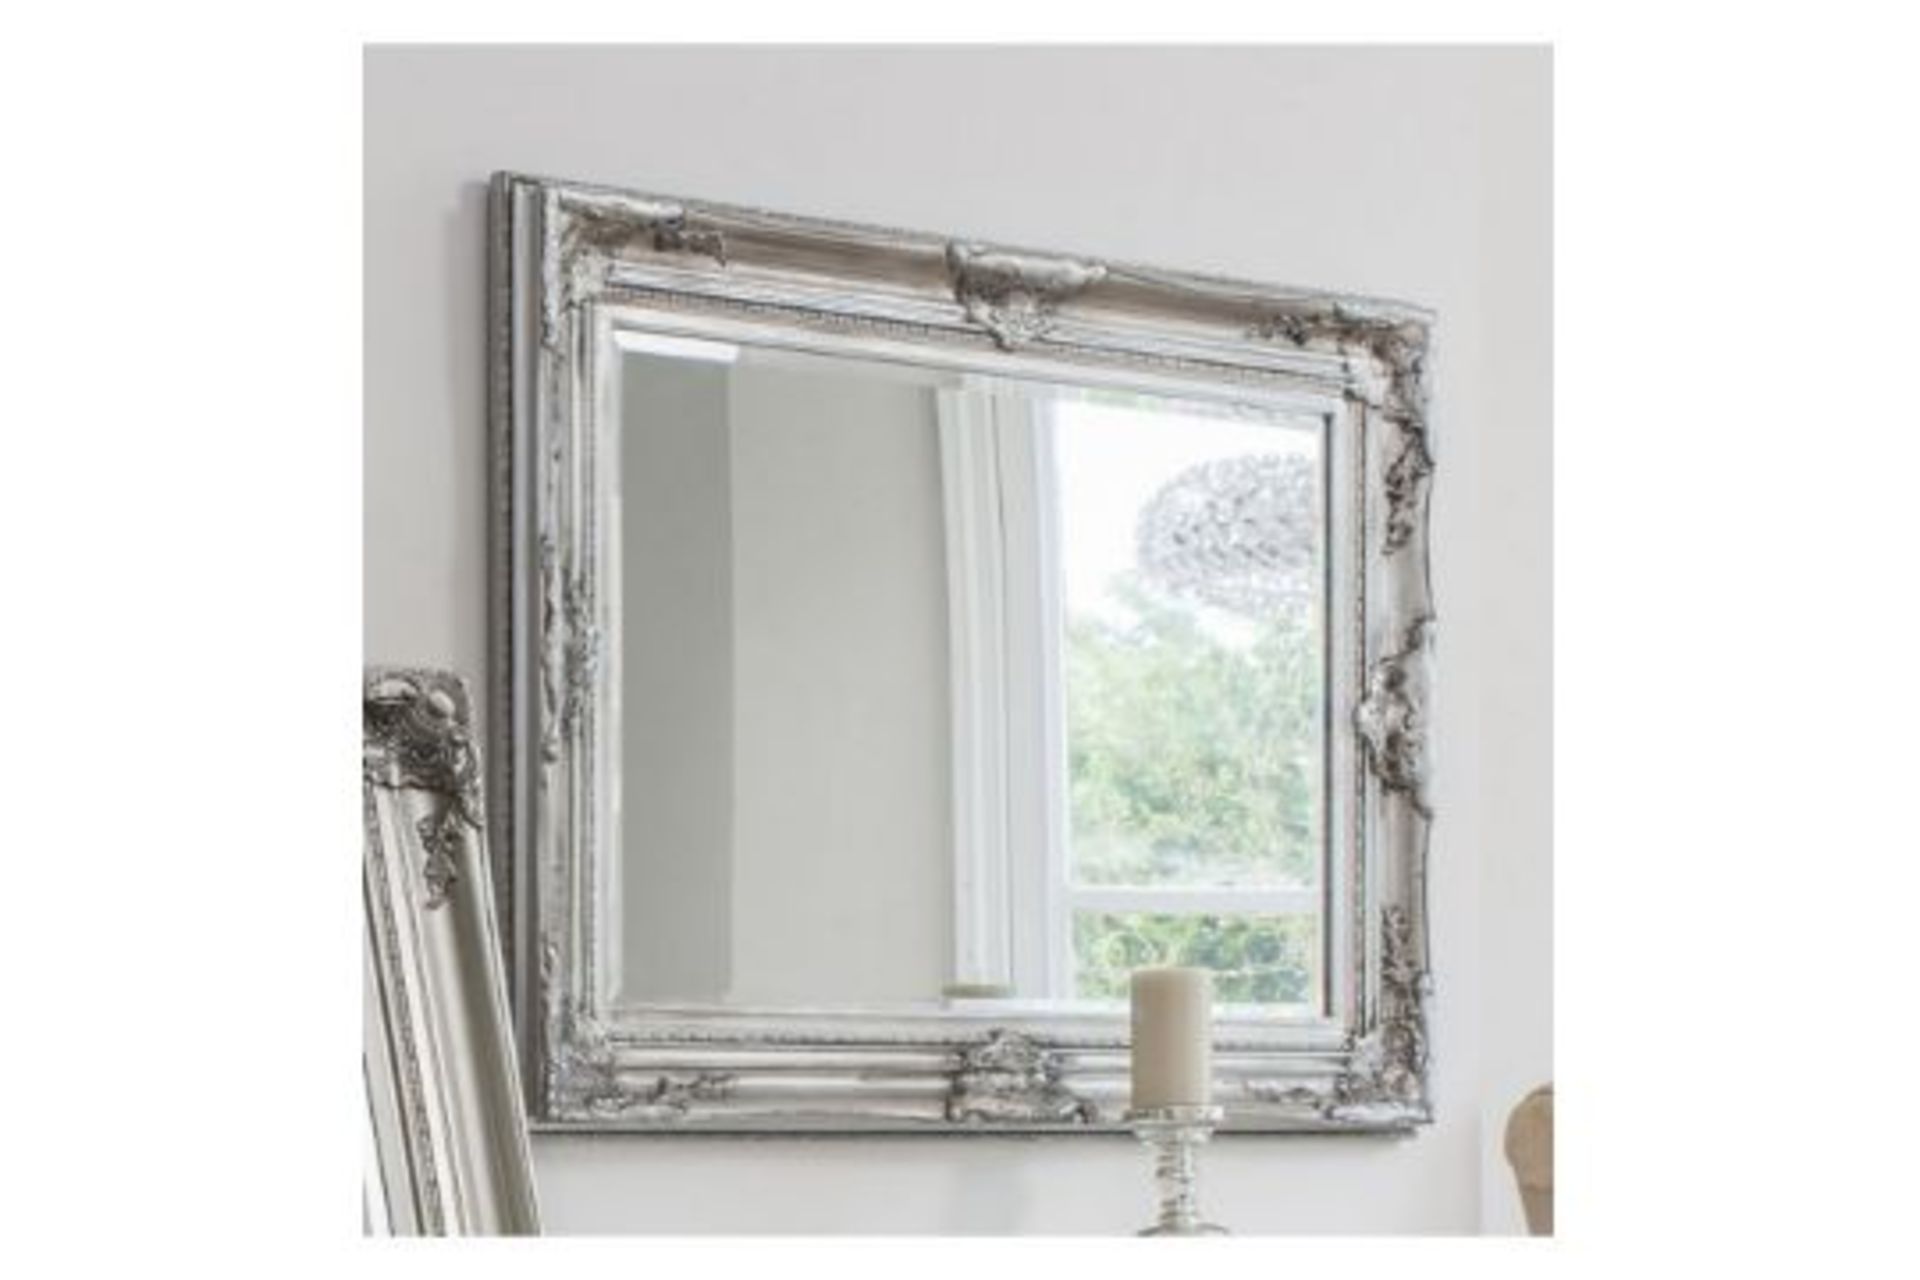 Harrow Rectangle Mirror Bright Silver Bring A Statement To The Home With The Harrow Rectangle Mirror